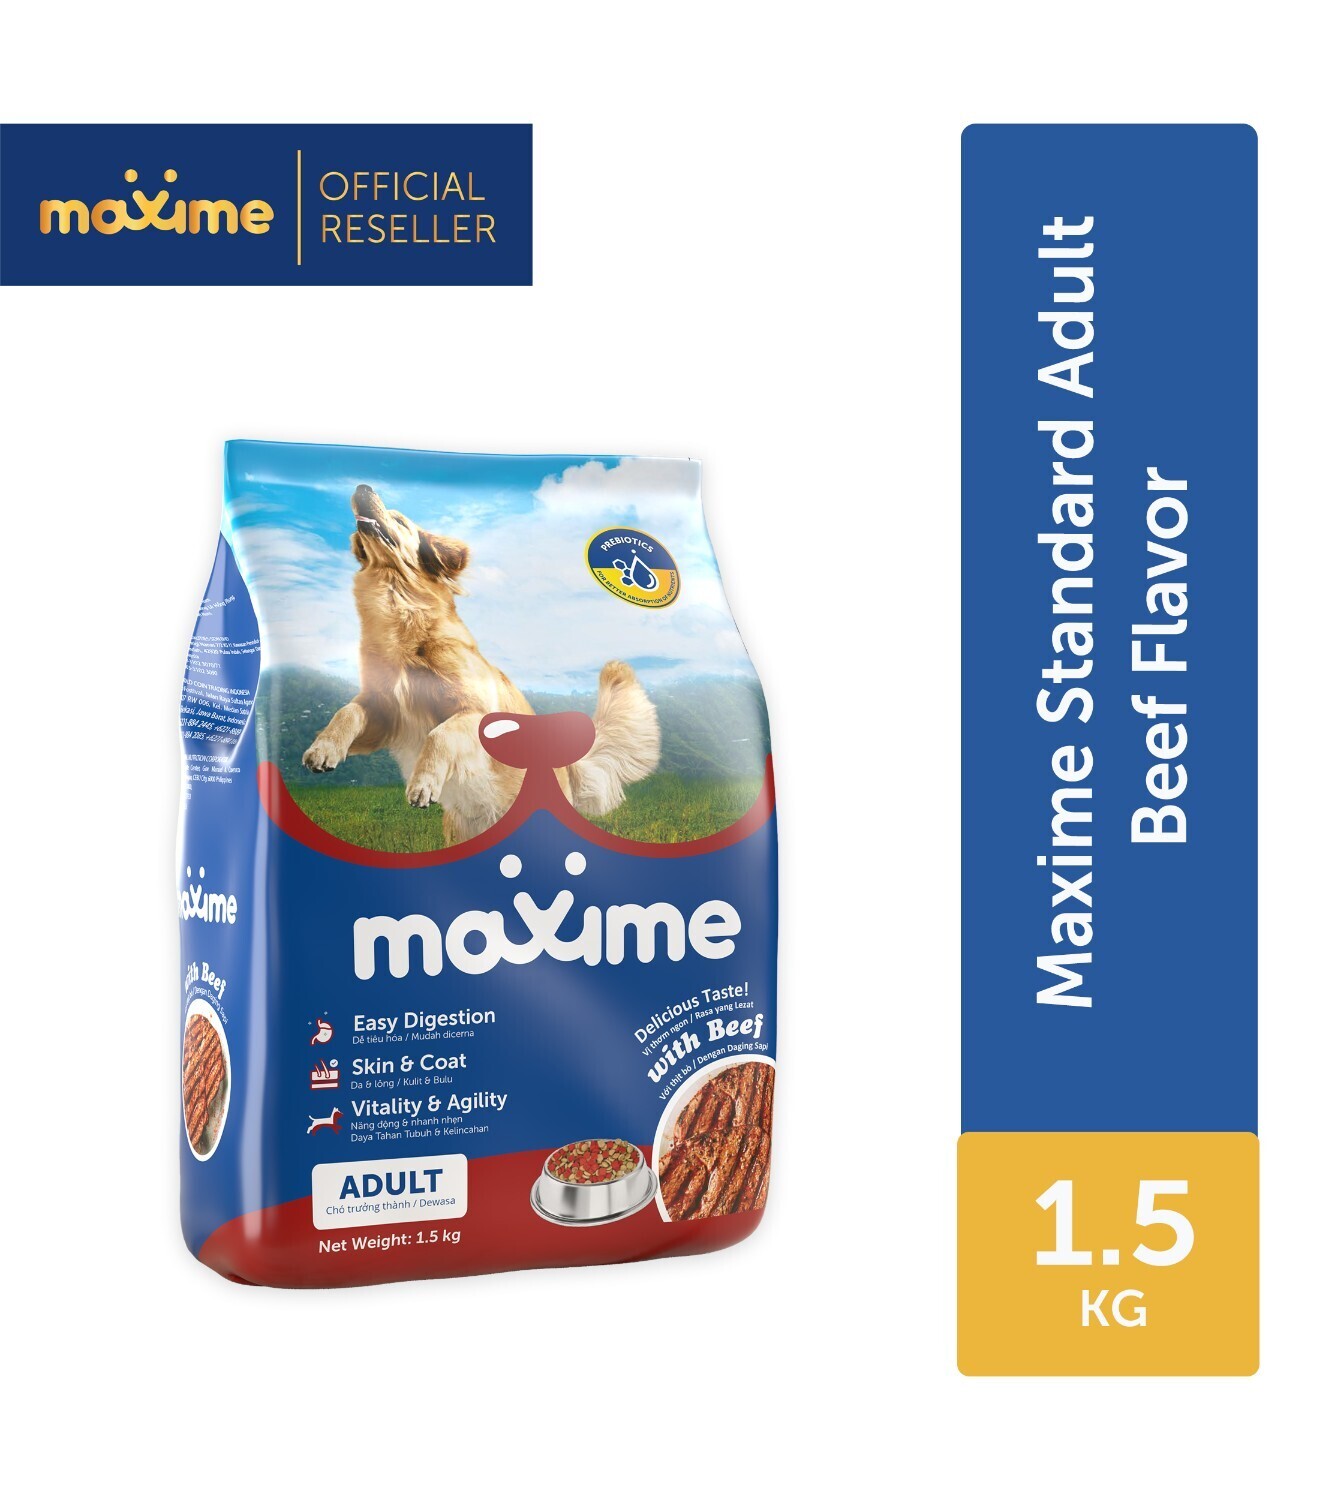 maxime reseller product catalog dog puppy